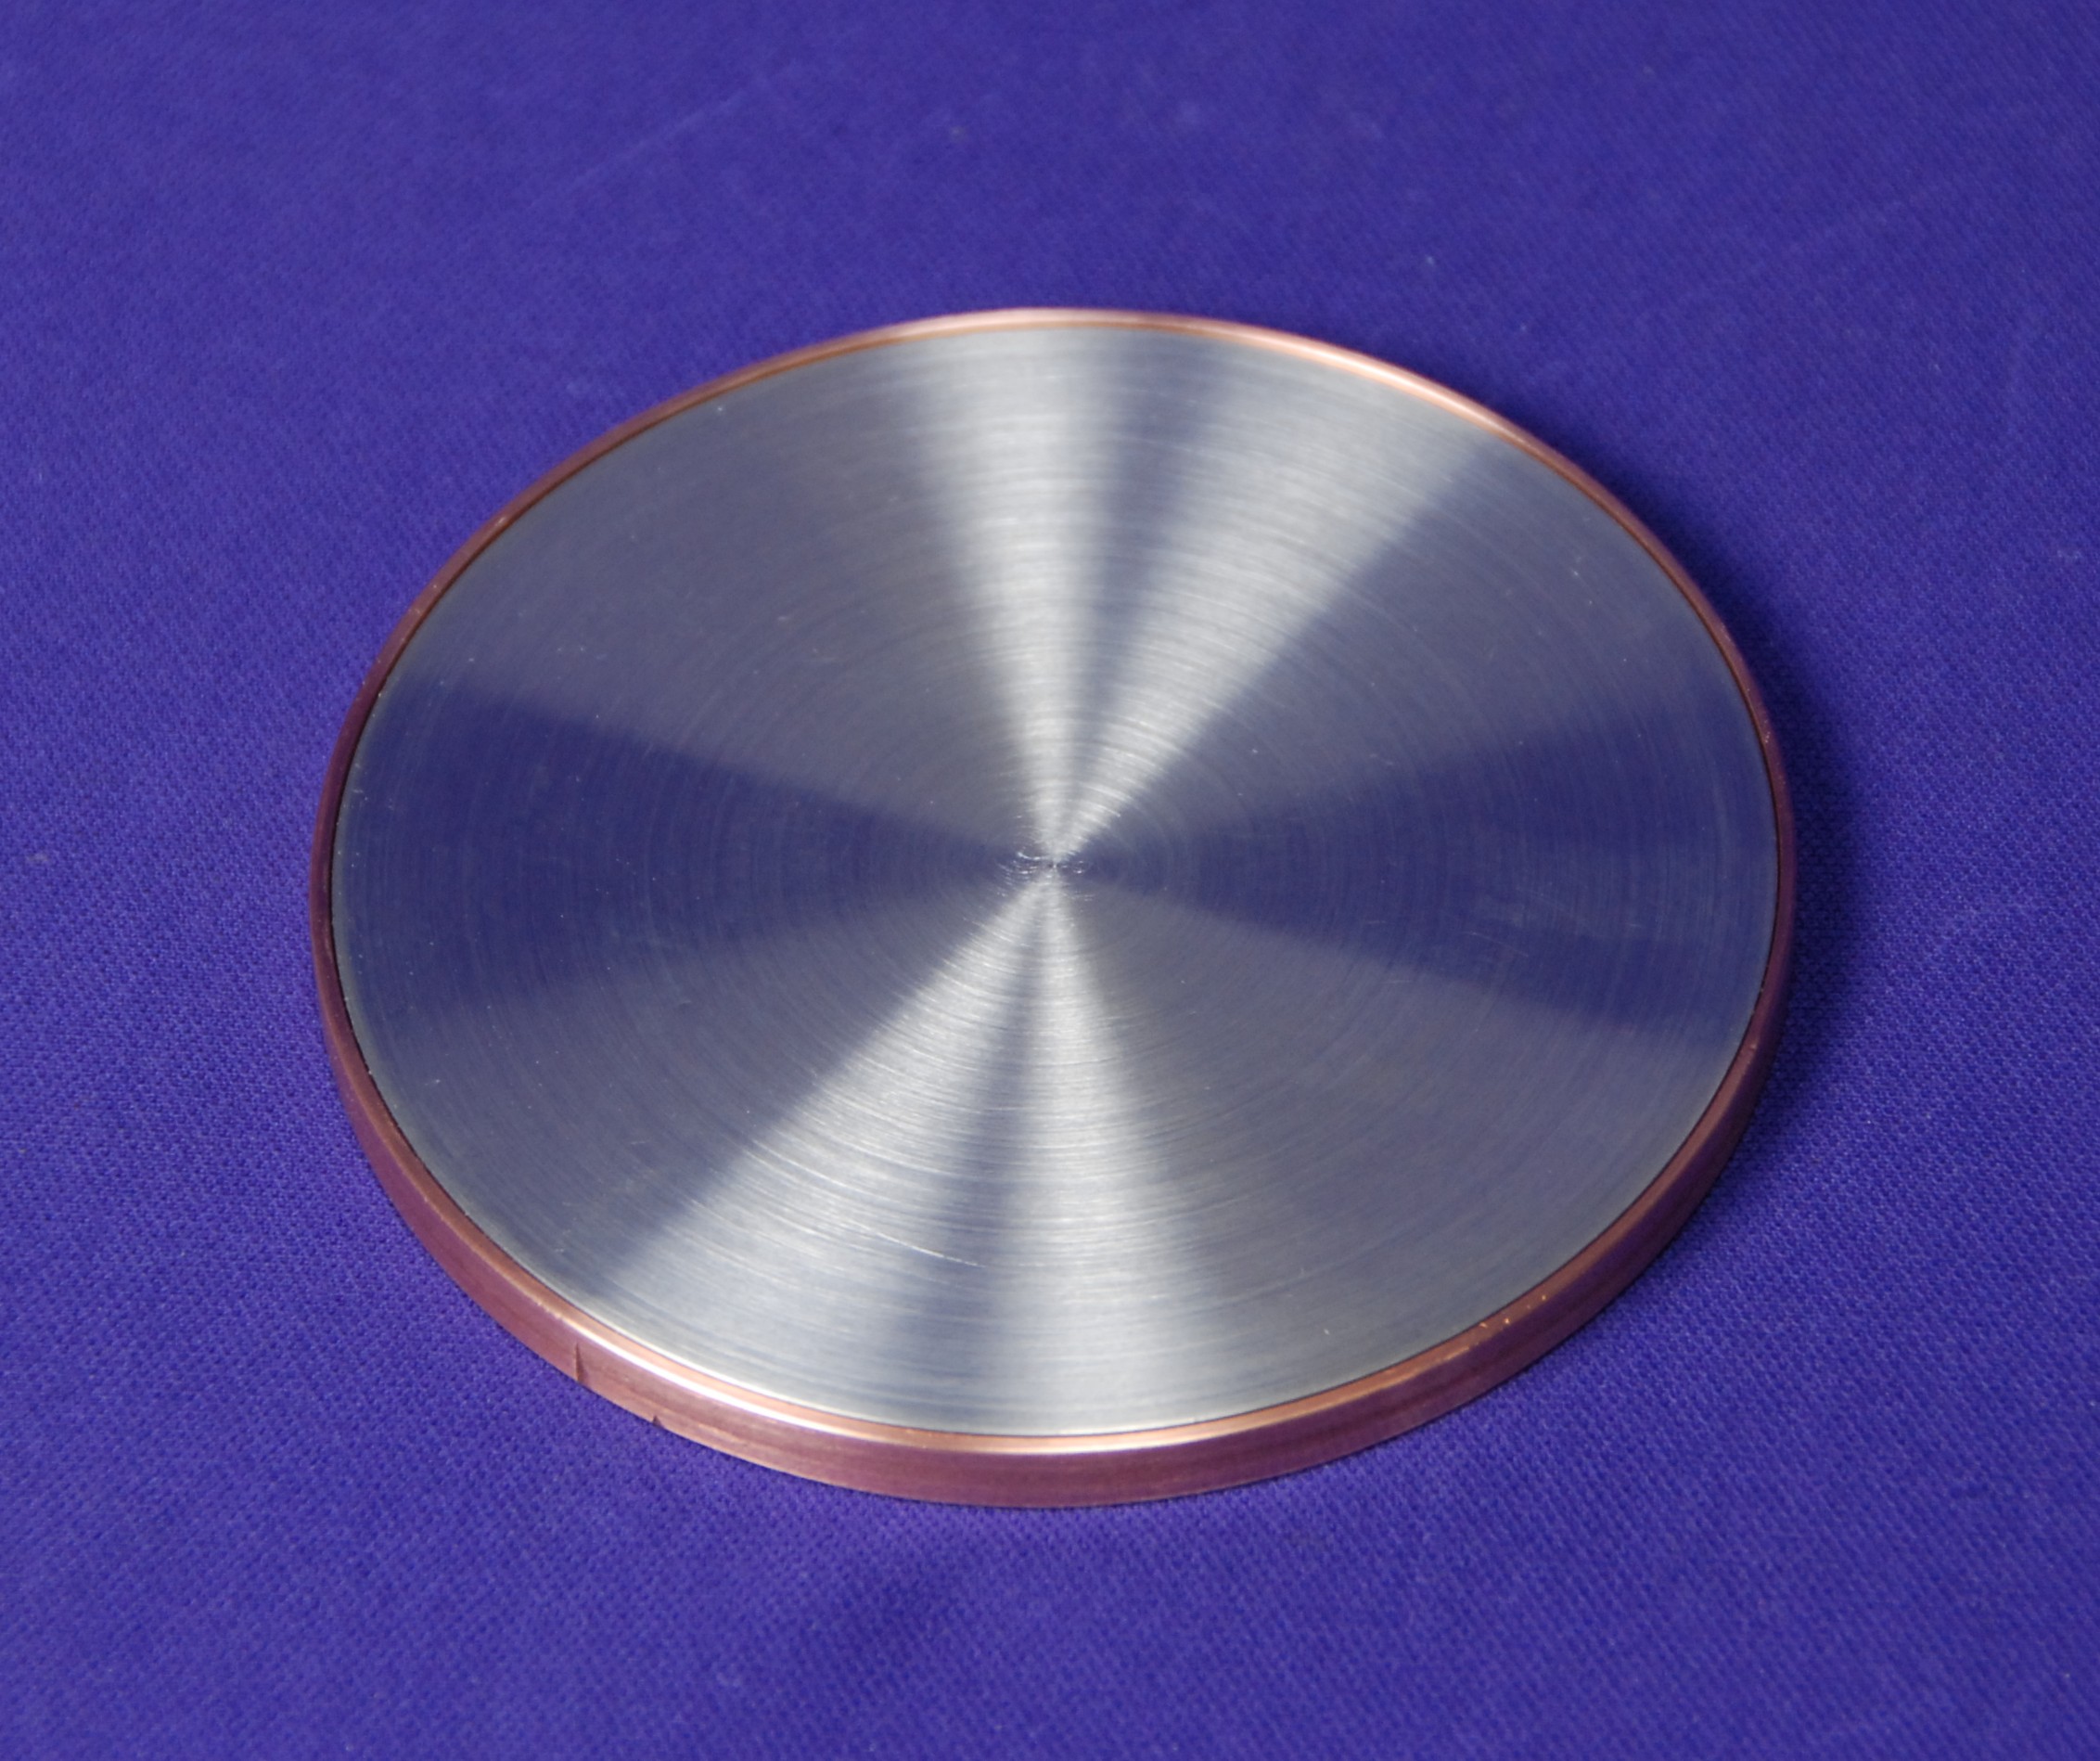 2 Inch Aluminum Target Bonded in a Copper Cup